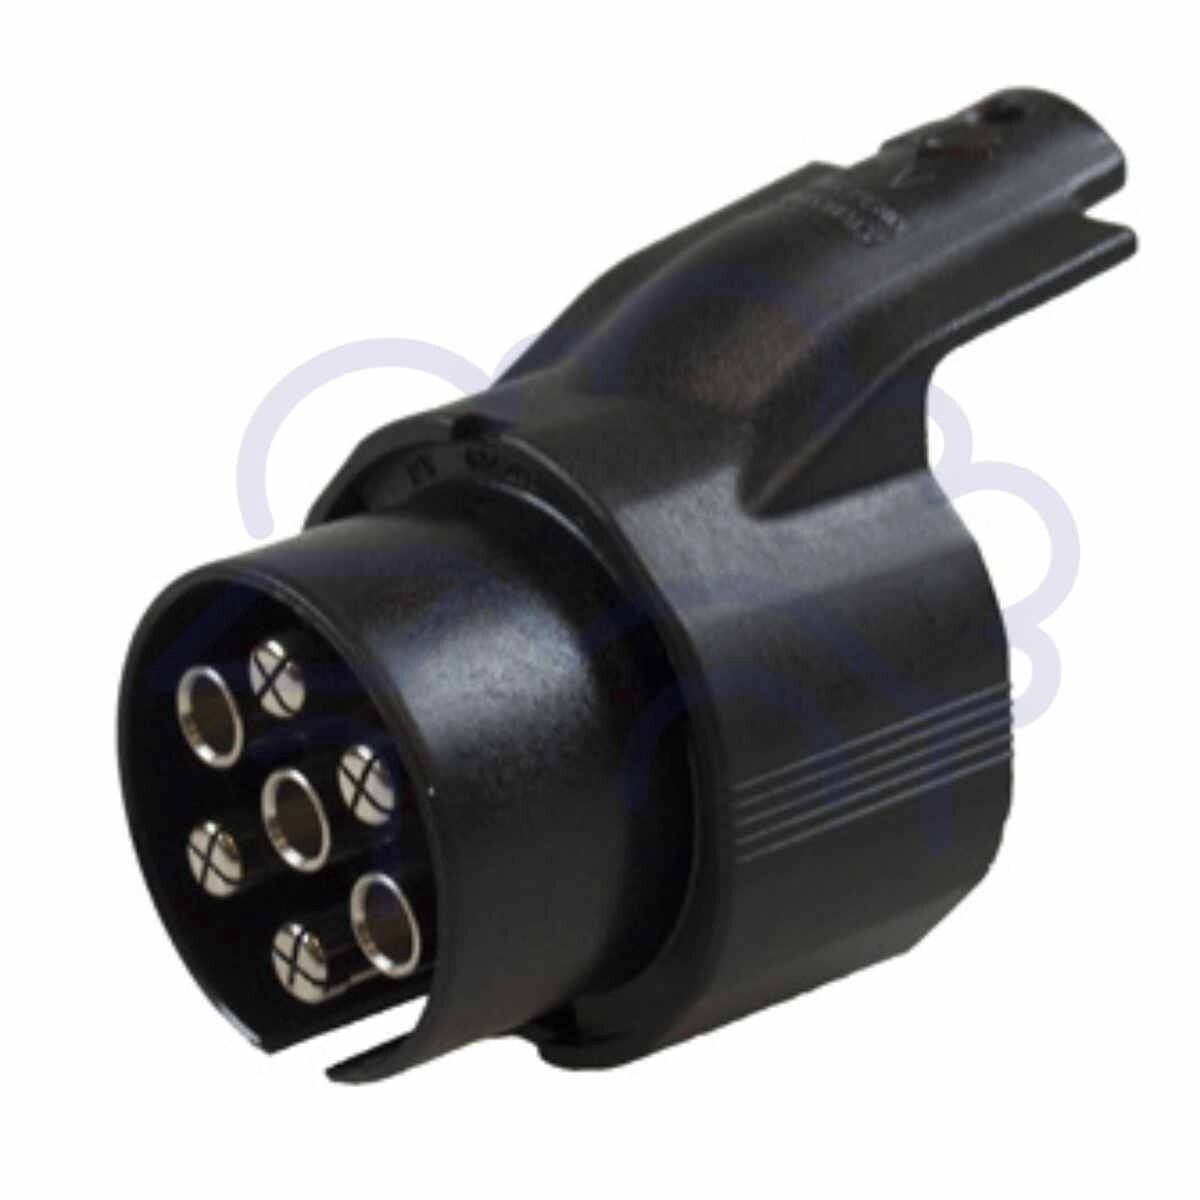 7v to 13t adaptor